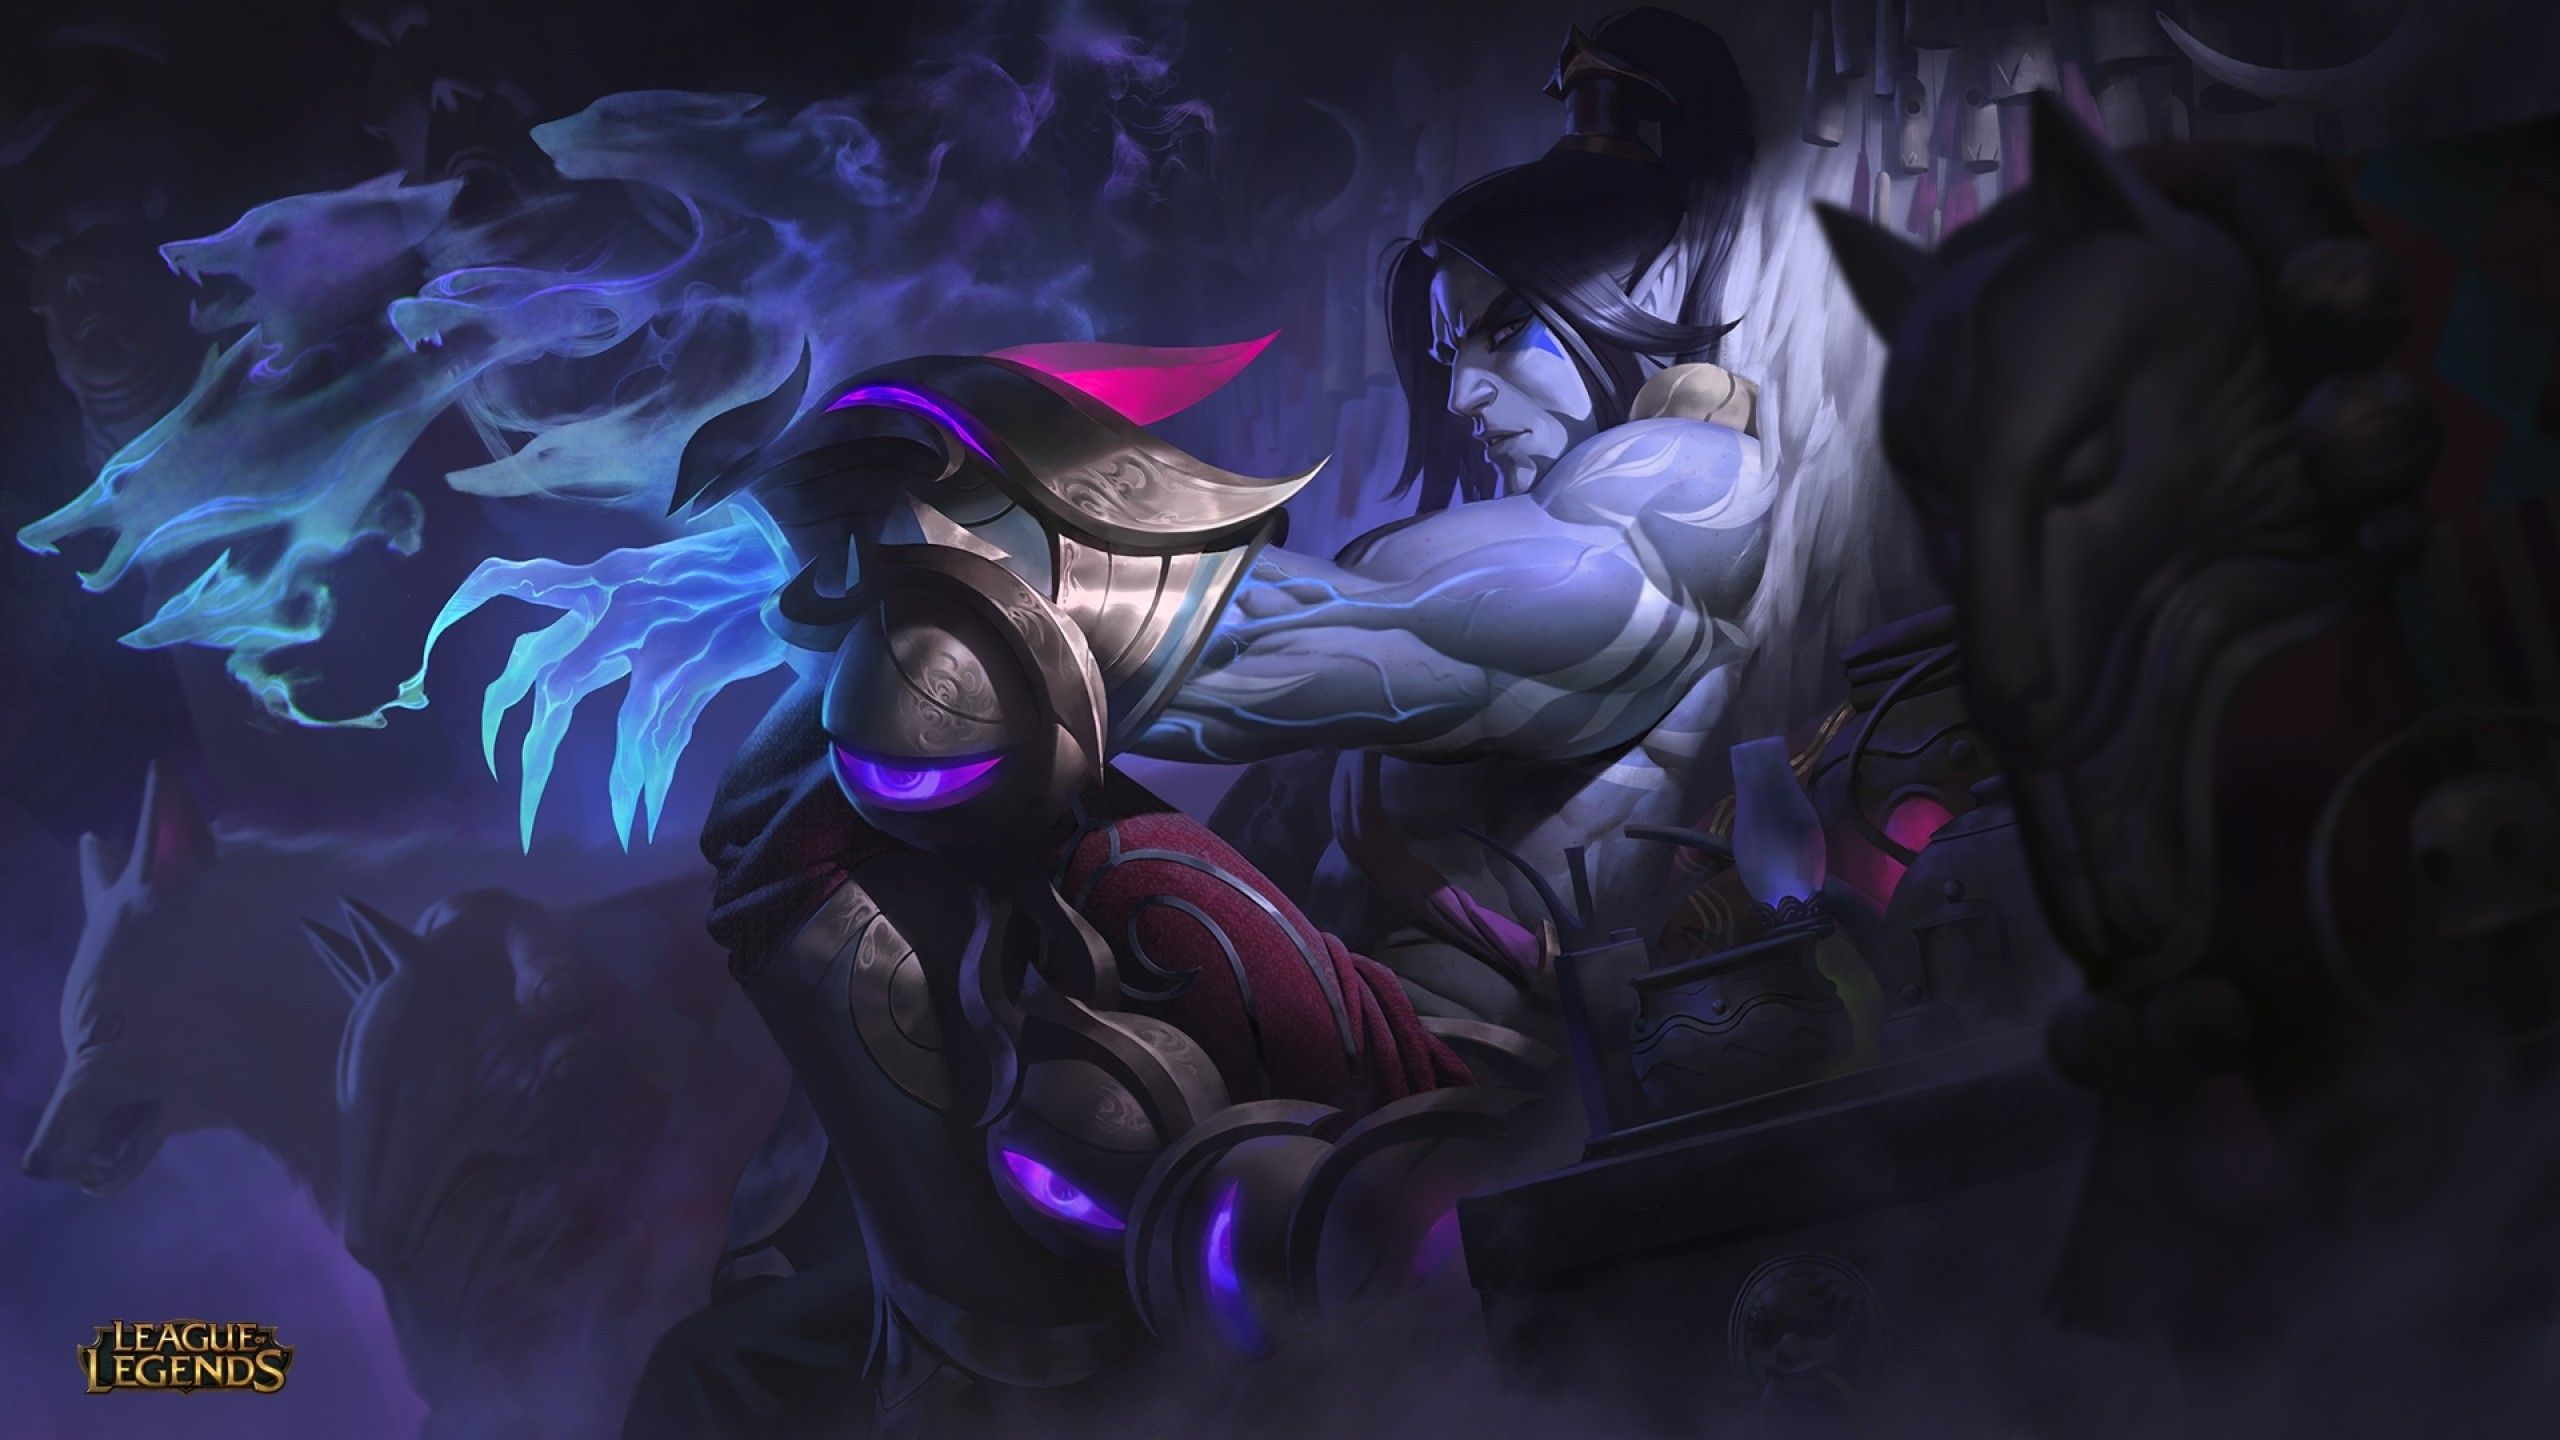 League of Legends Wallpapers on